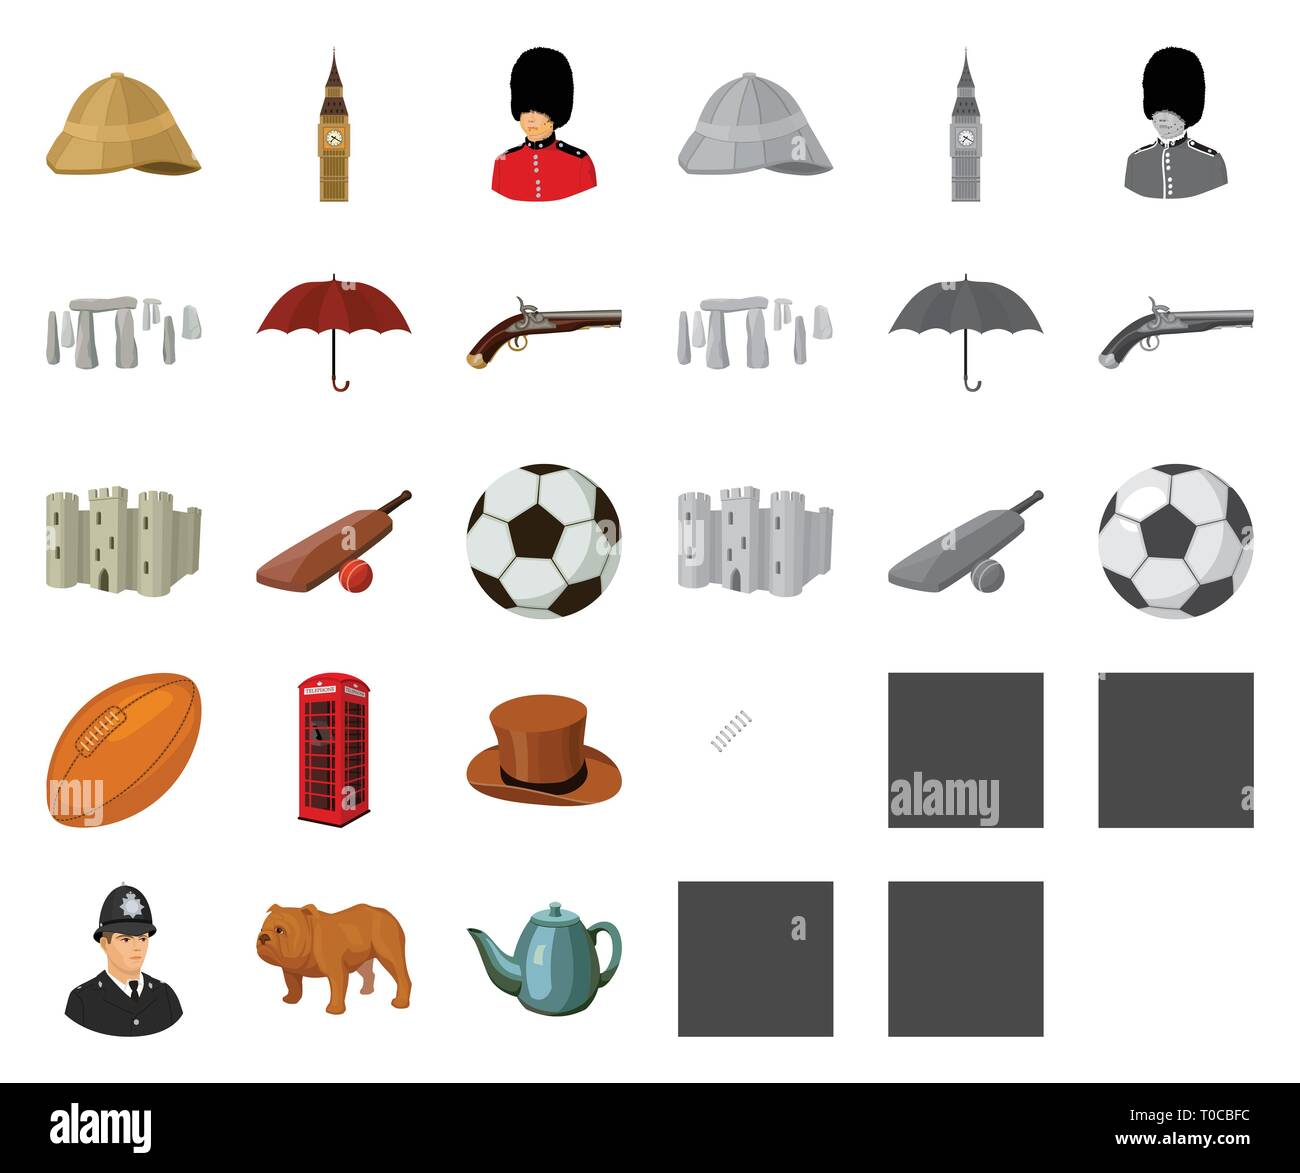 attraction,ball,bat,ben,big,bulldog,cabin,cartoon,mono,castle,collection,country,cricket,culture,design,england,english,football,guard,hat,helmet,icon,illustration,isolated,journey,light,logo,monument,phone,pistol,pith,population,queen,red,regby,set,showplace,sight,sign,stone,street,symbol,teapot,territory,top,tourism,traditions,traveling,umbrella,vector,web Vector Vectors , Stock Vector